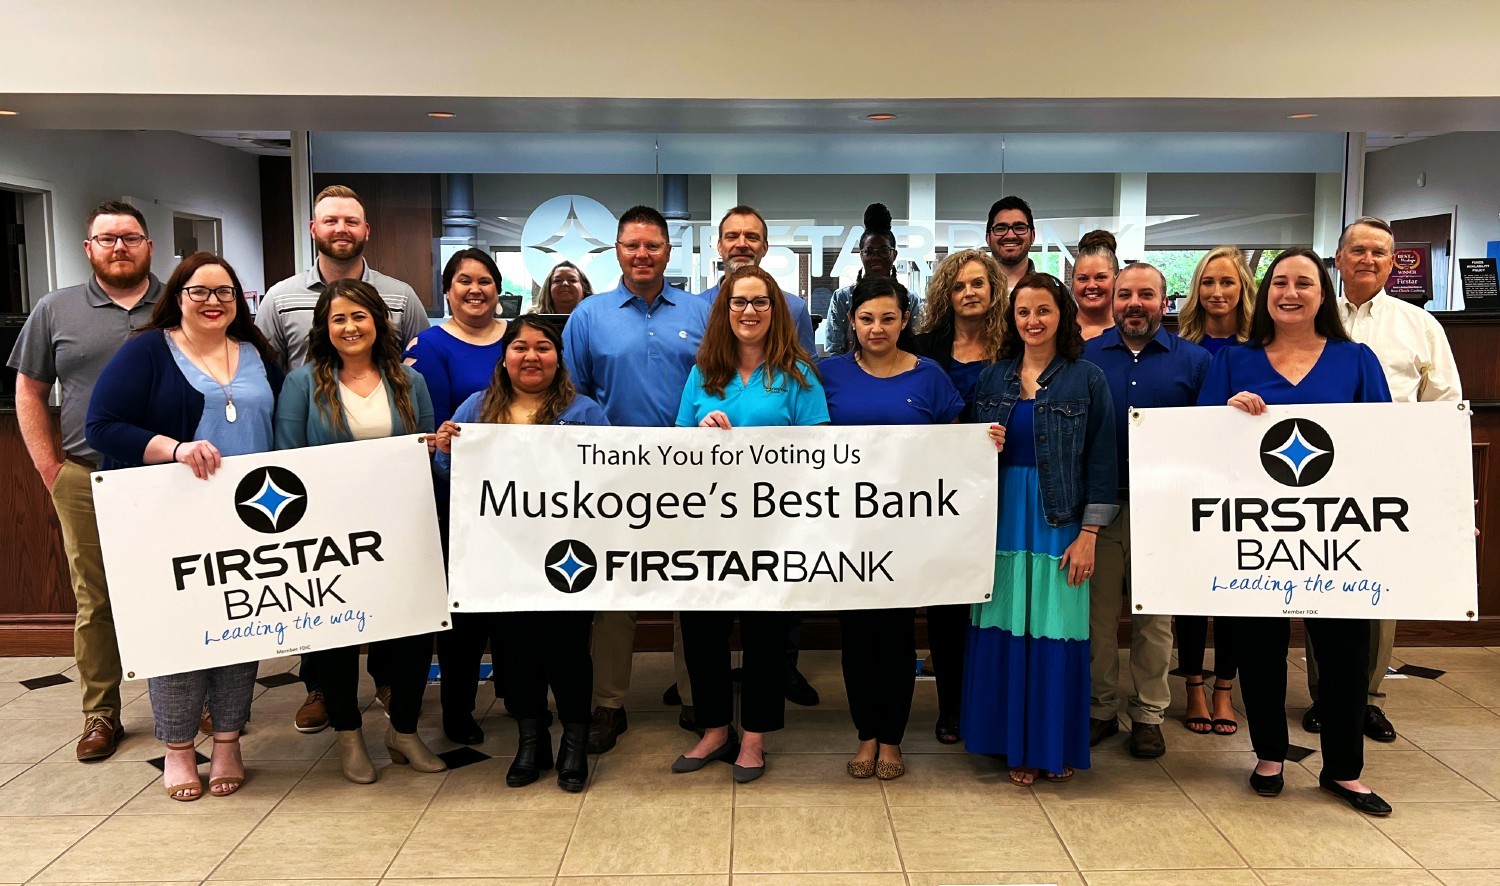 Firstar Bank employees celebrate being voted Best Bank in Muskogee, OK.